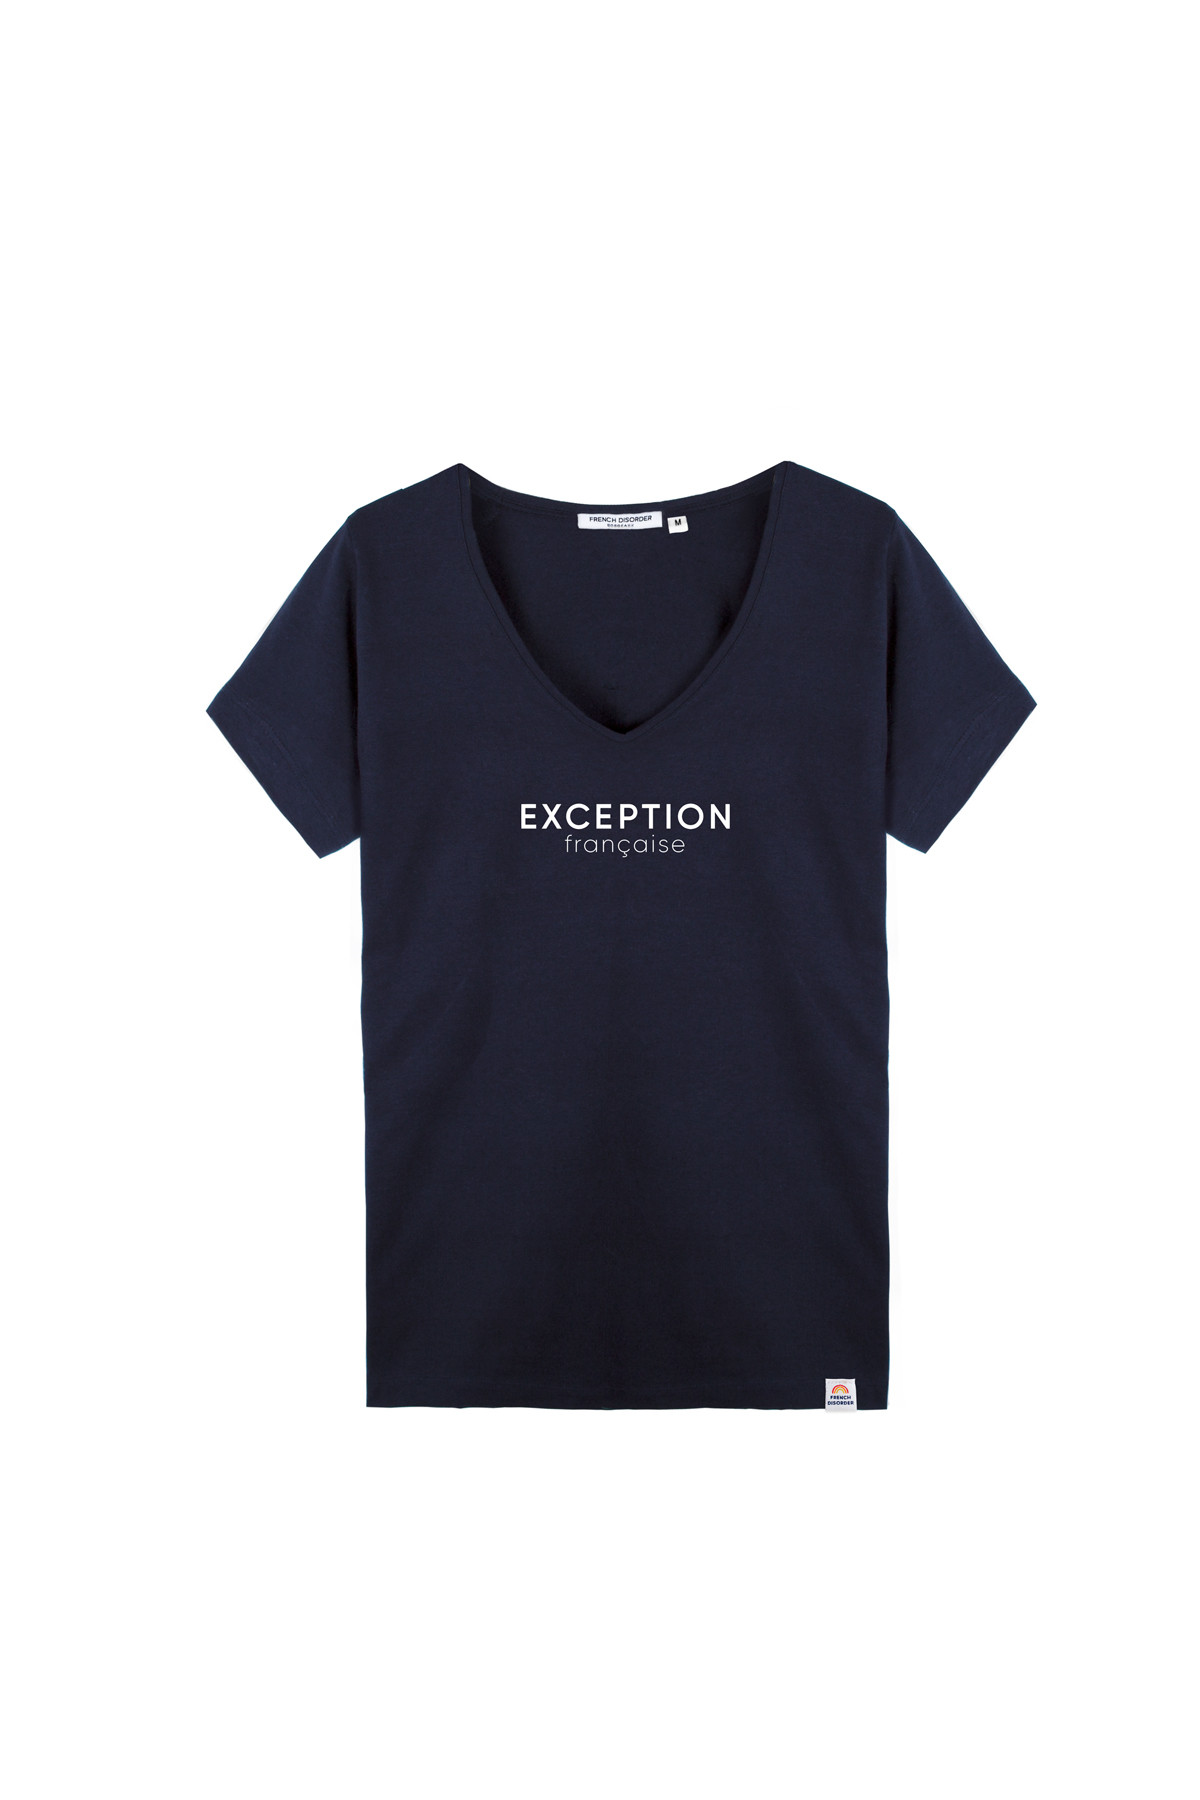 Tshirt Dolly EXCEPTION FRANCAISE